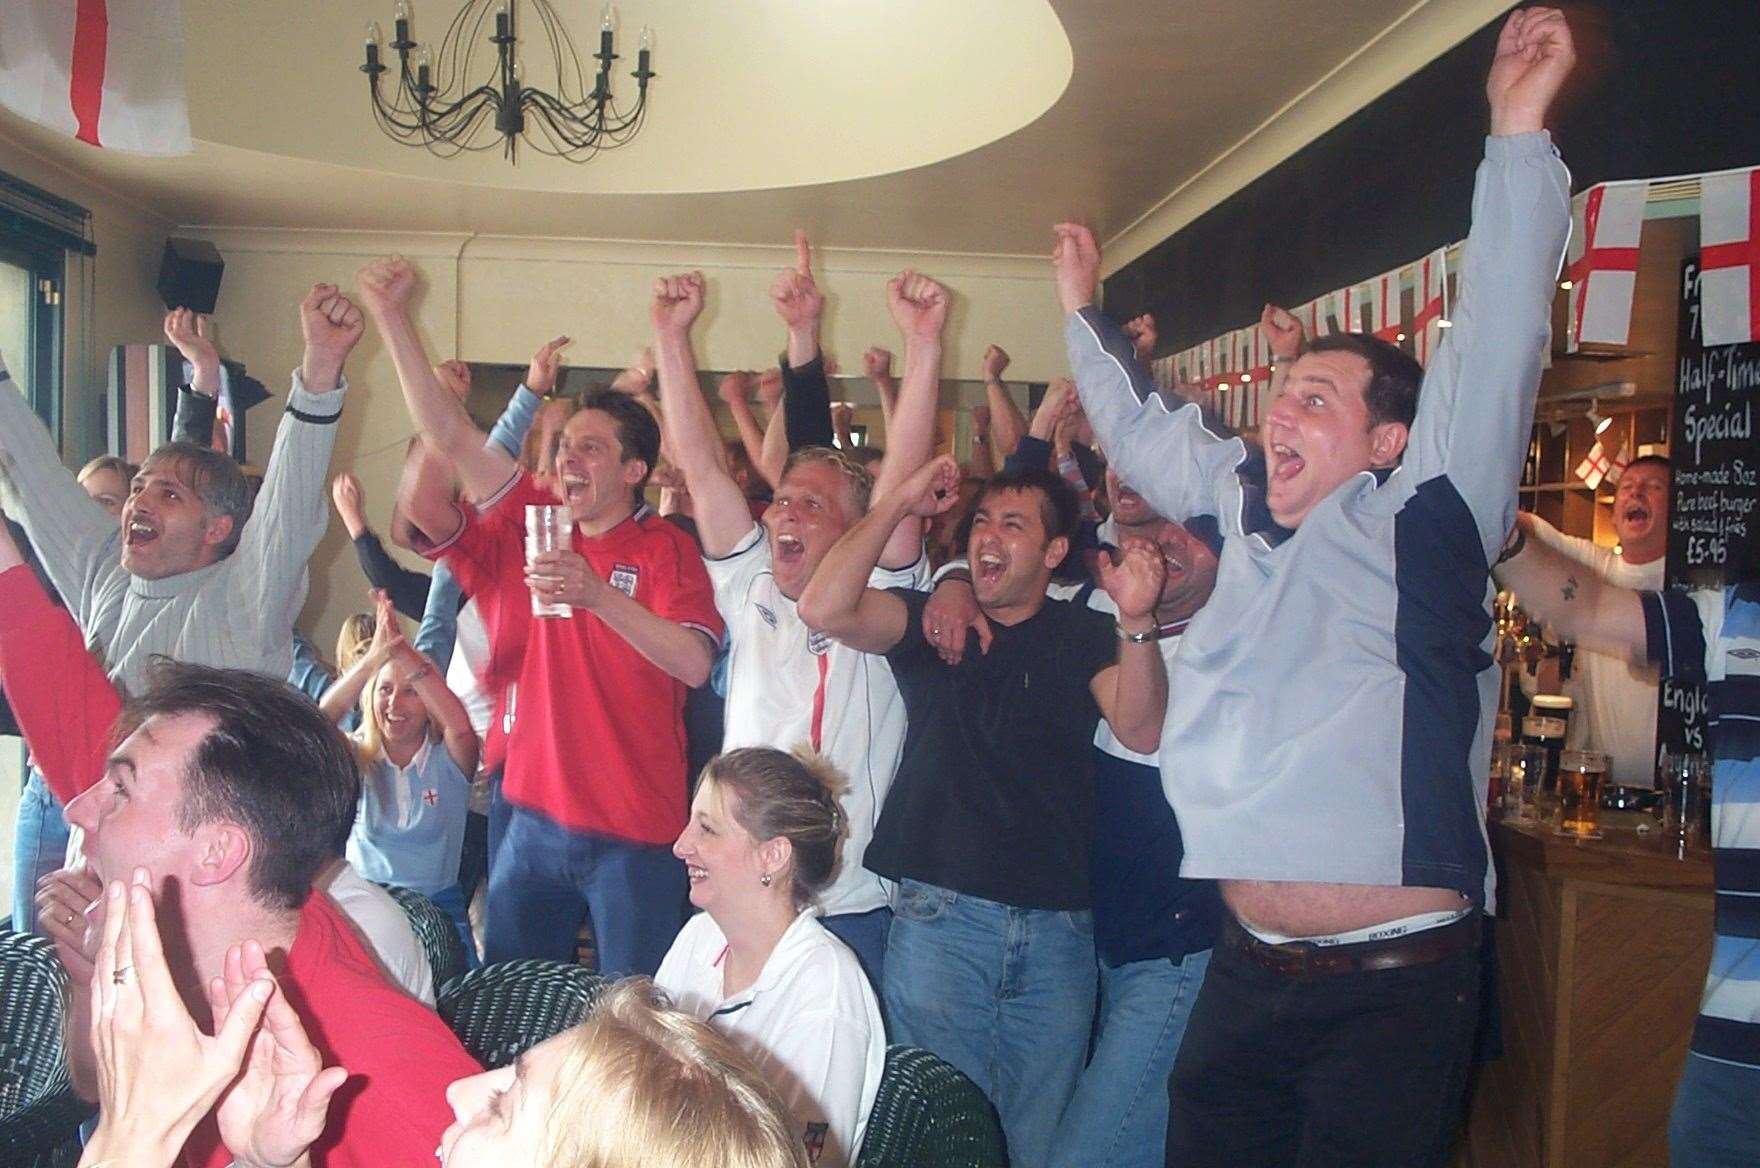 England fans celebrate at the Hole in the Roof in Deal as David Beckham scores his penalty winner against Argentina in 2002